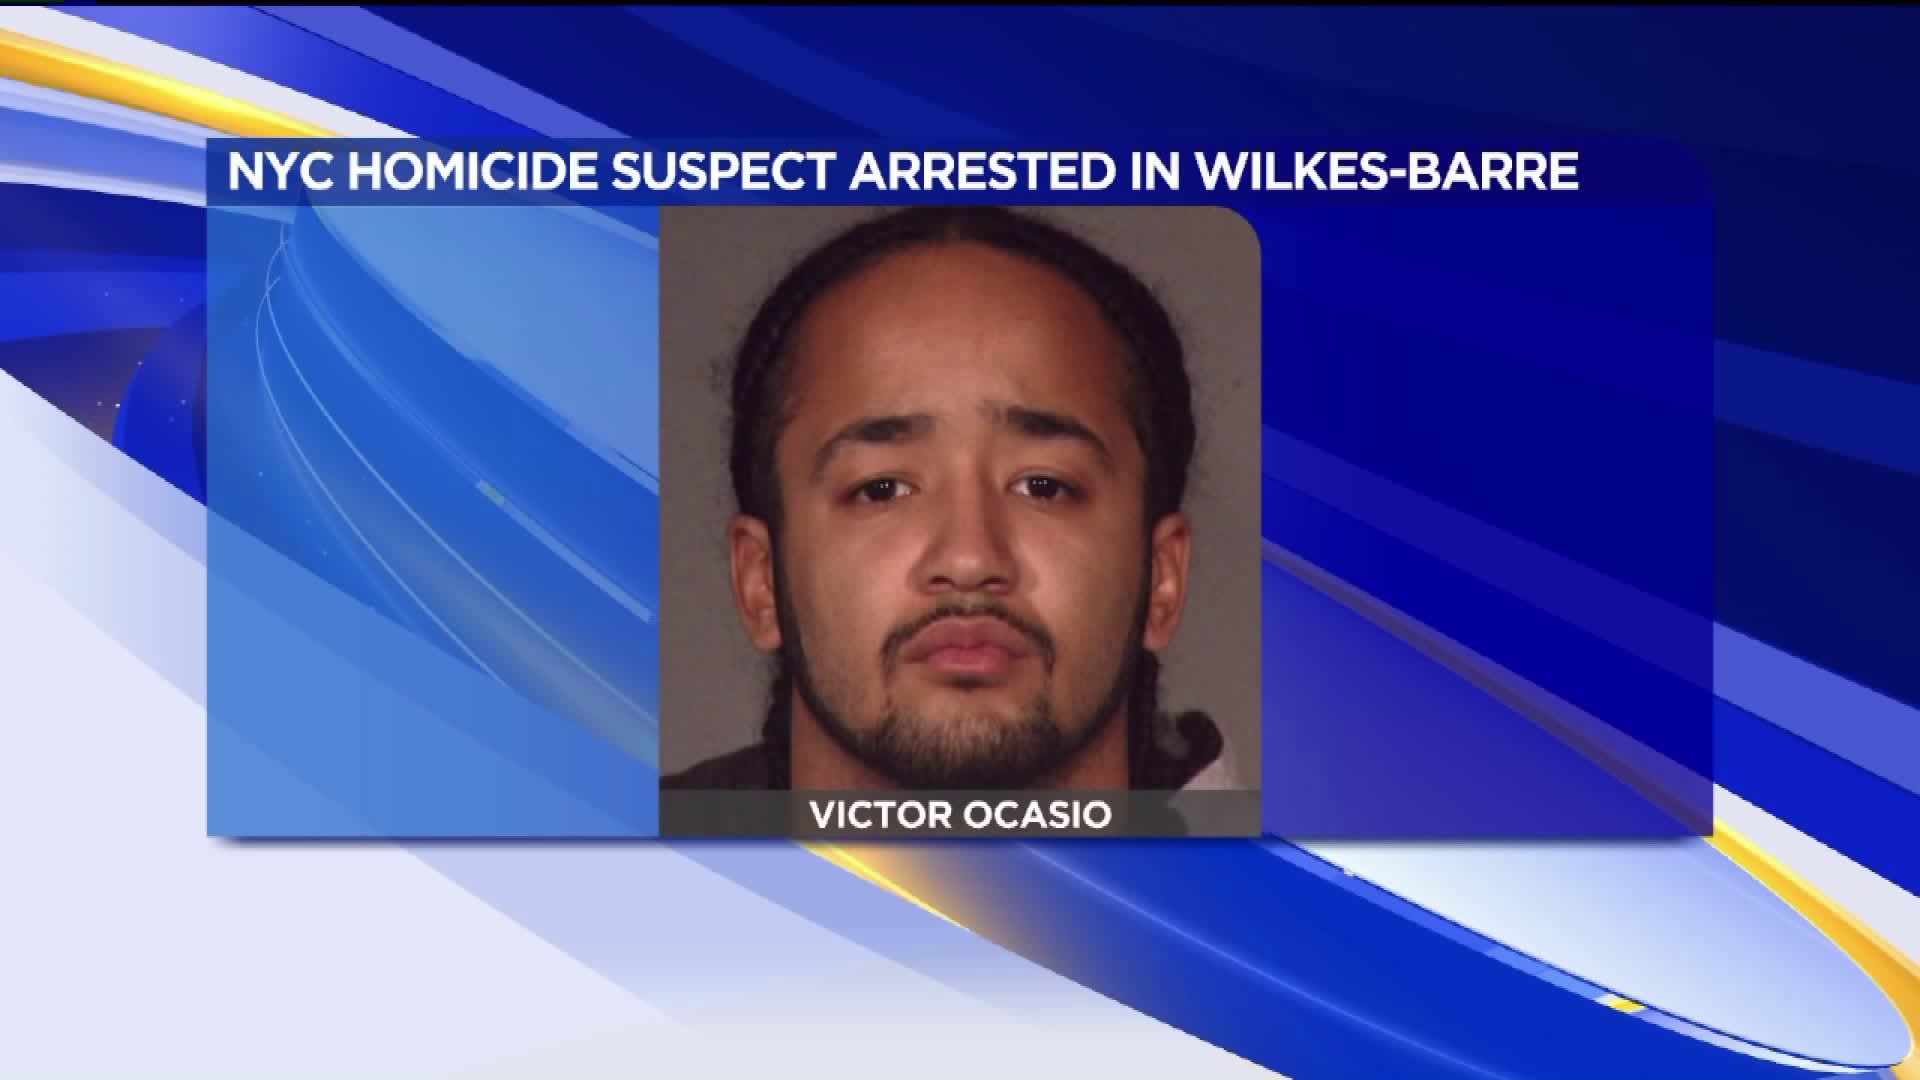 Man Arrested in Wilkes-Barre for NYC Homicide